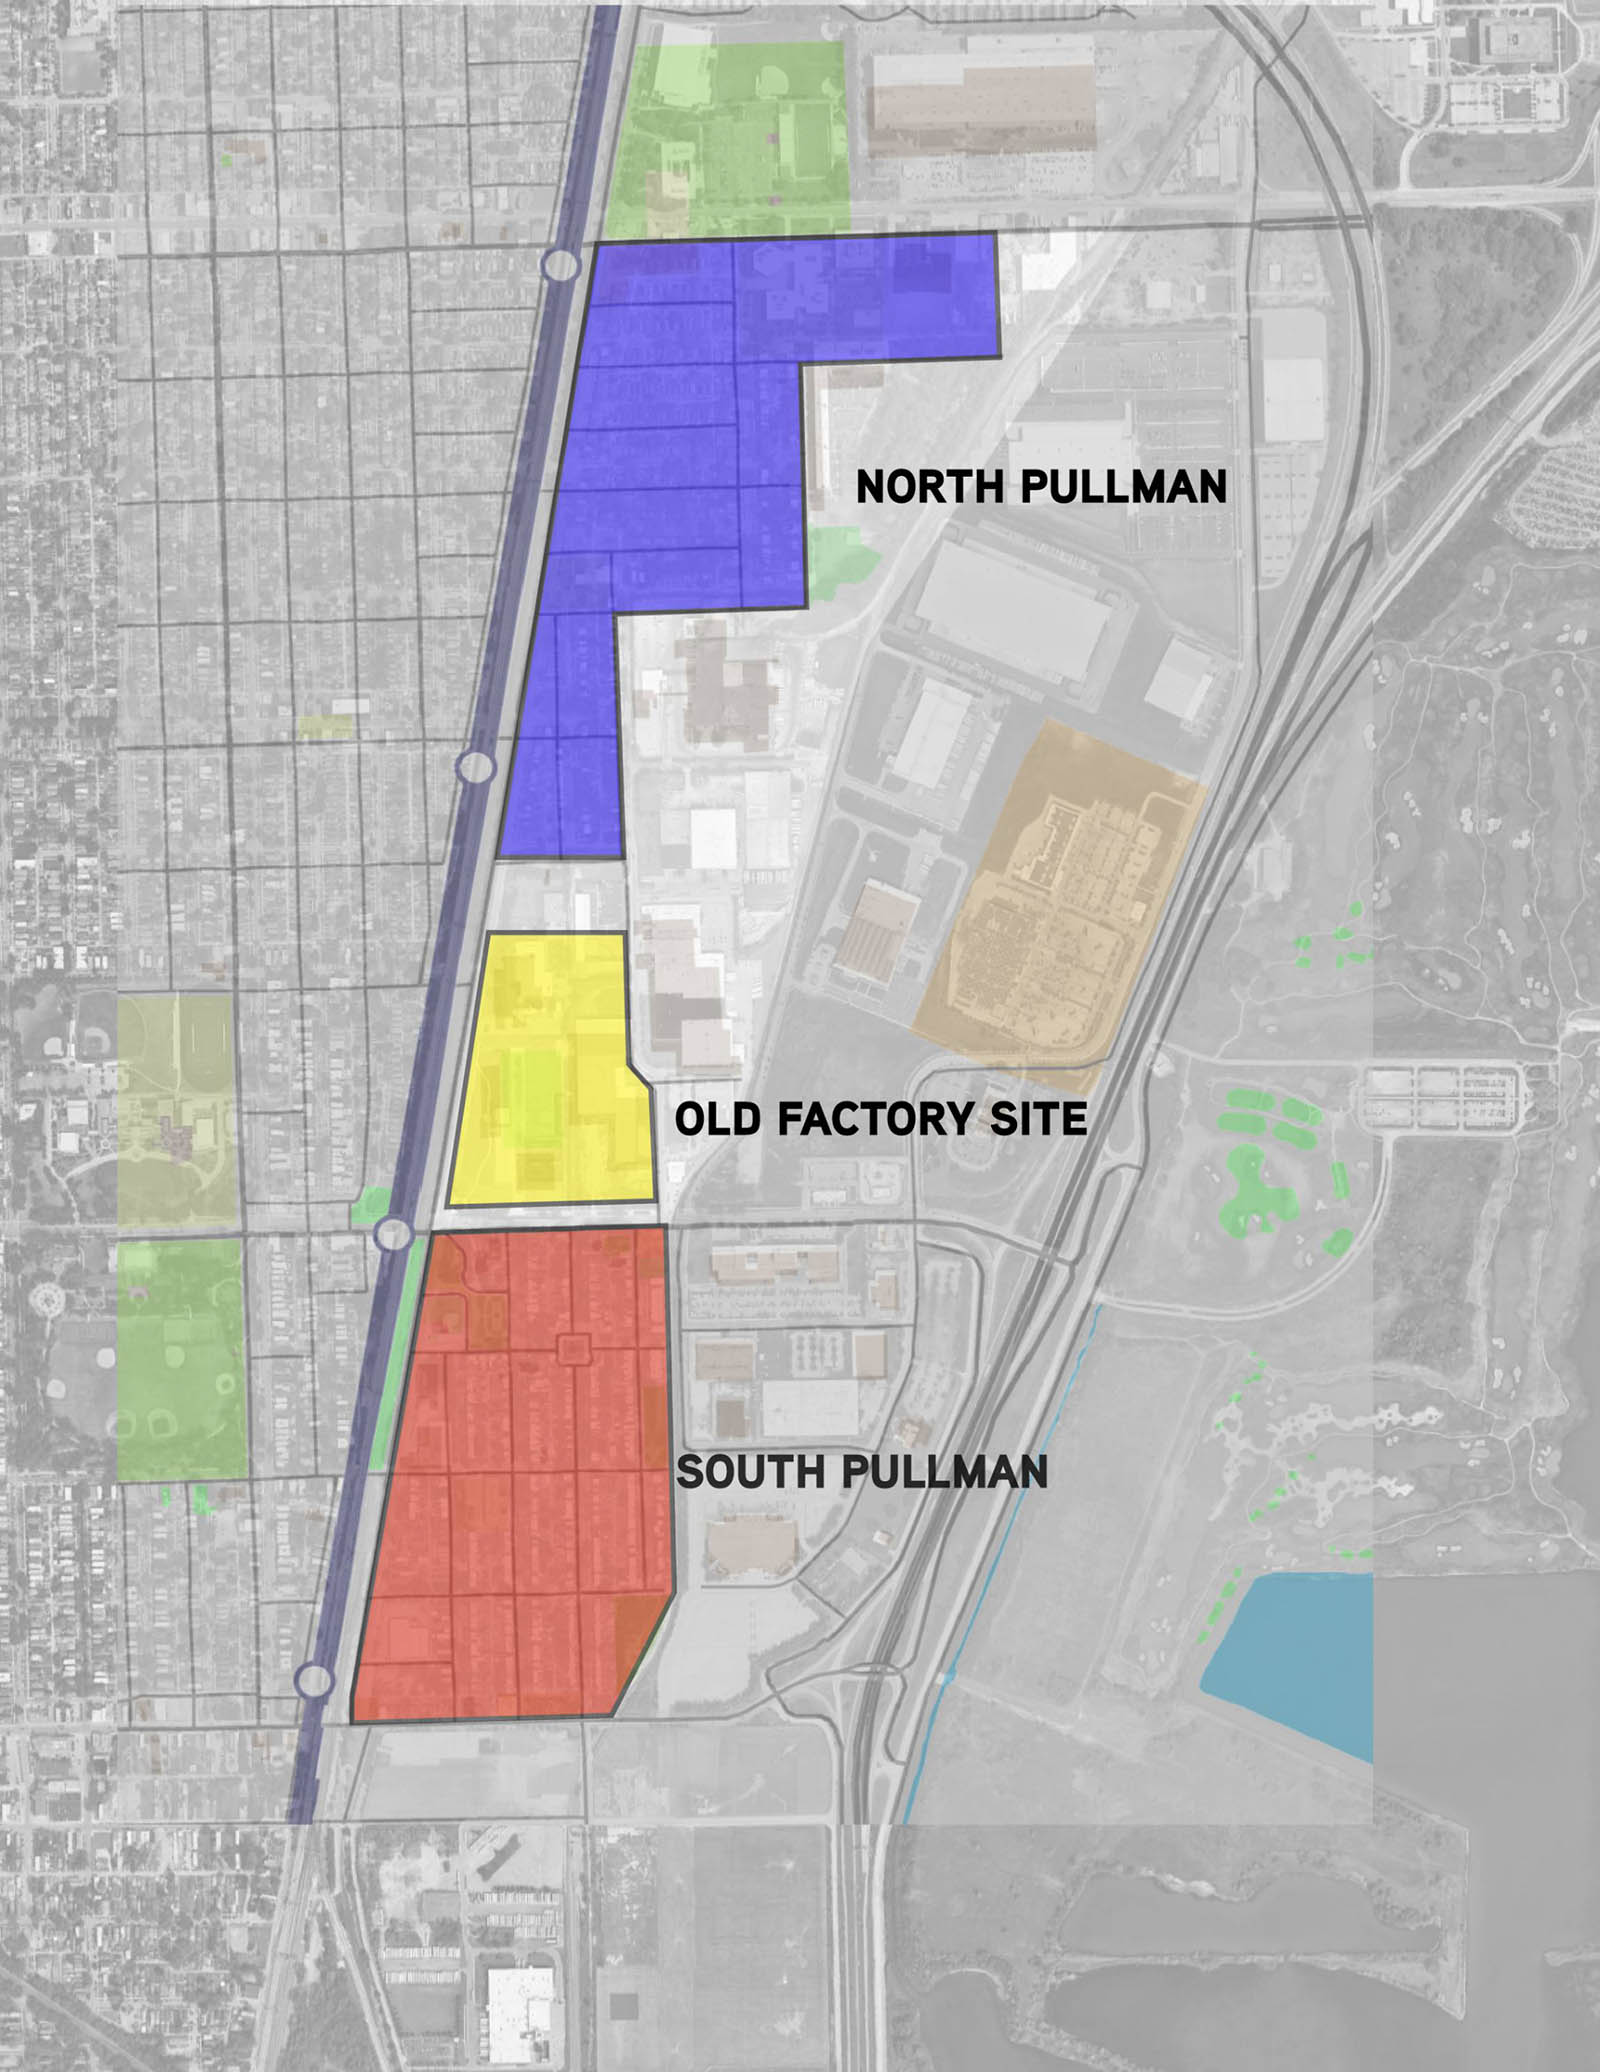 Neighborhood map of North and South Pullman